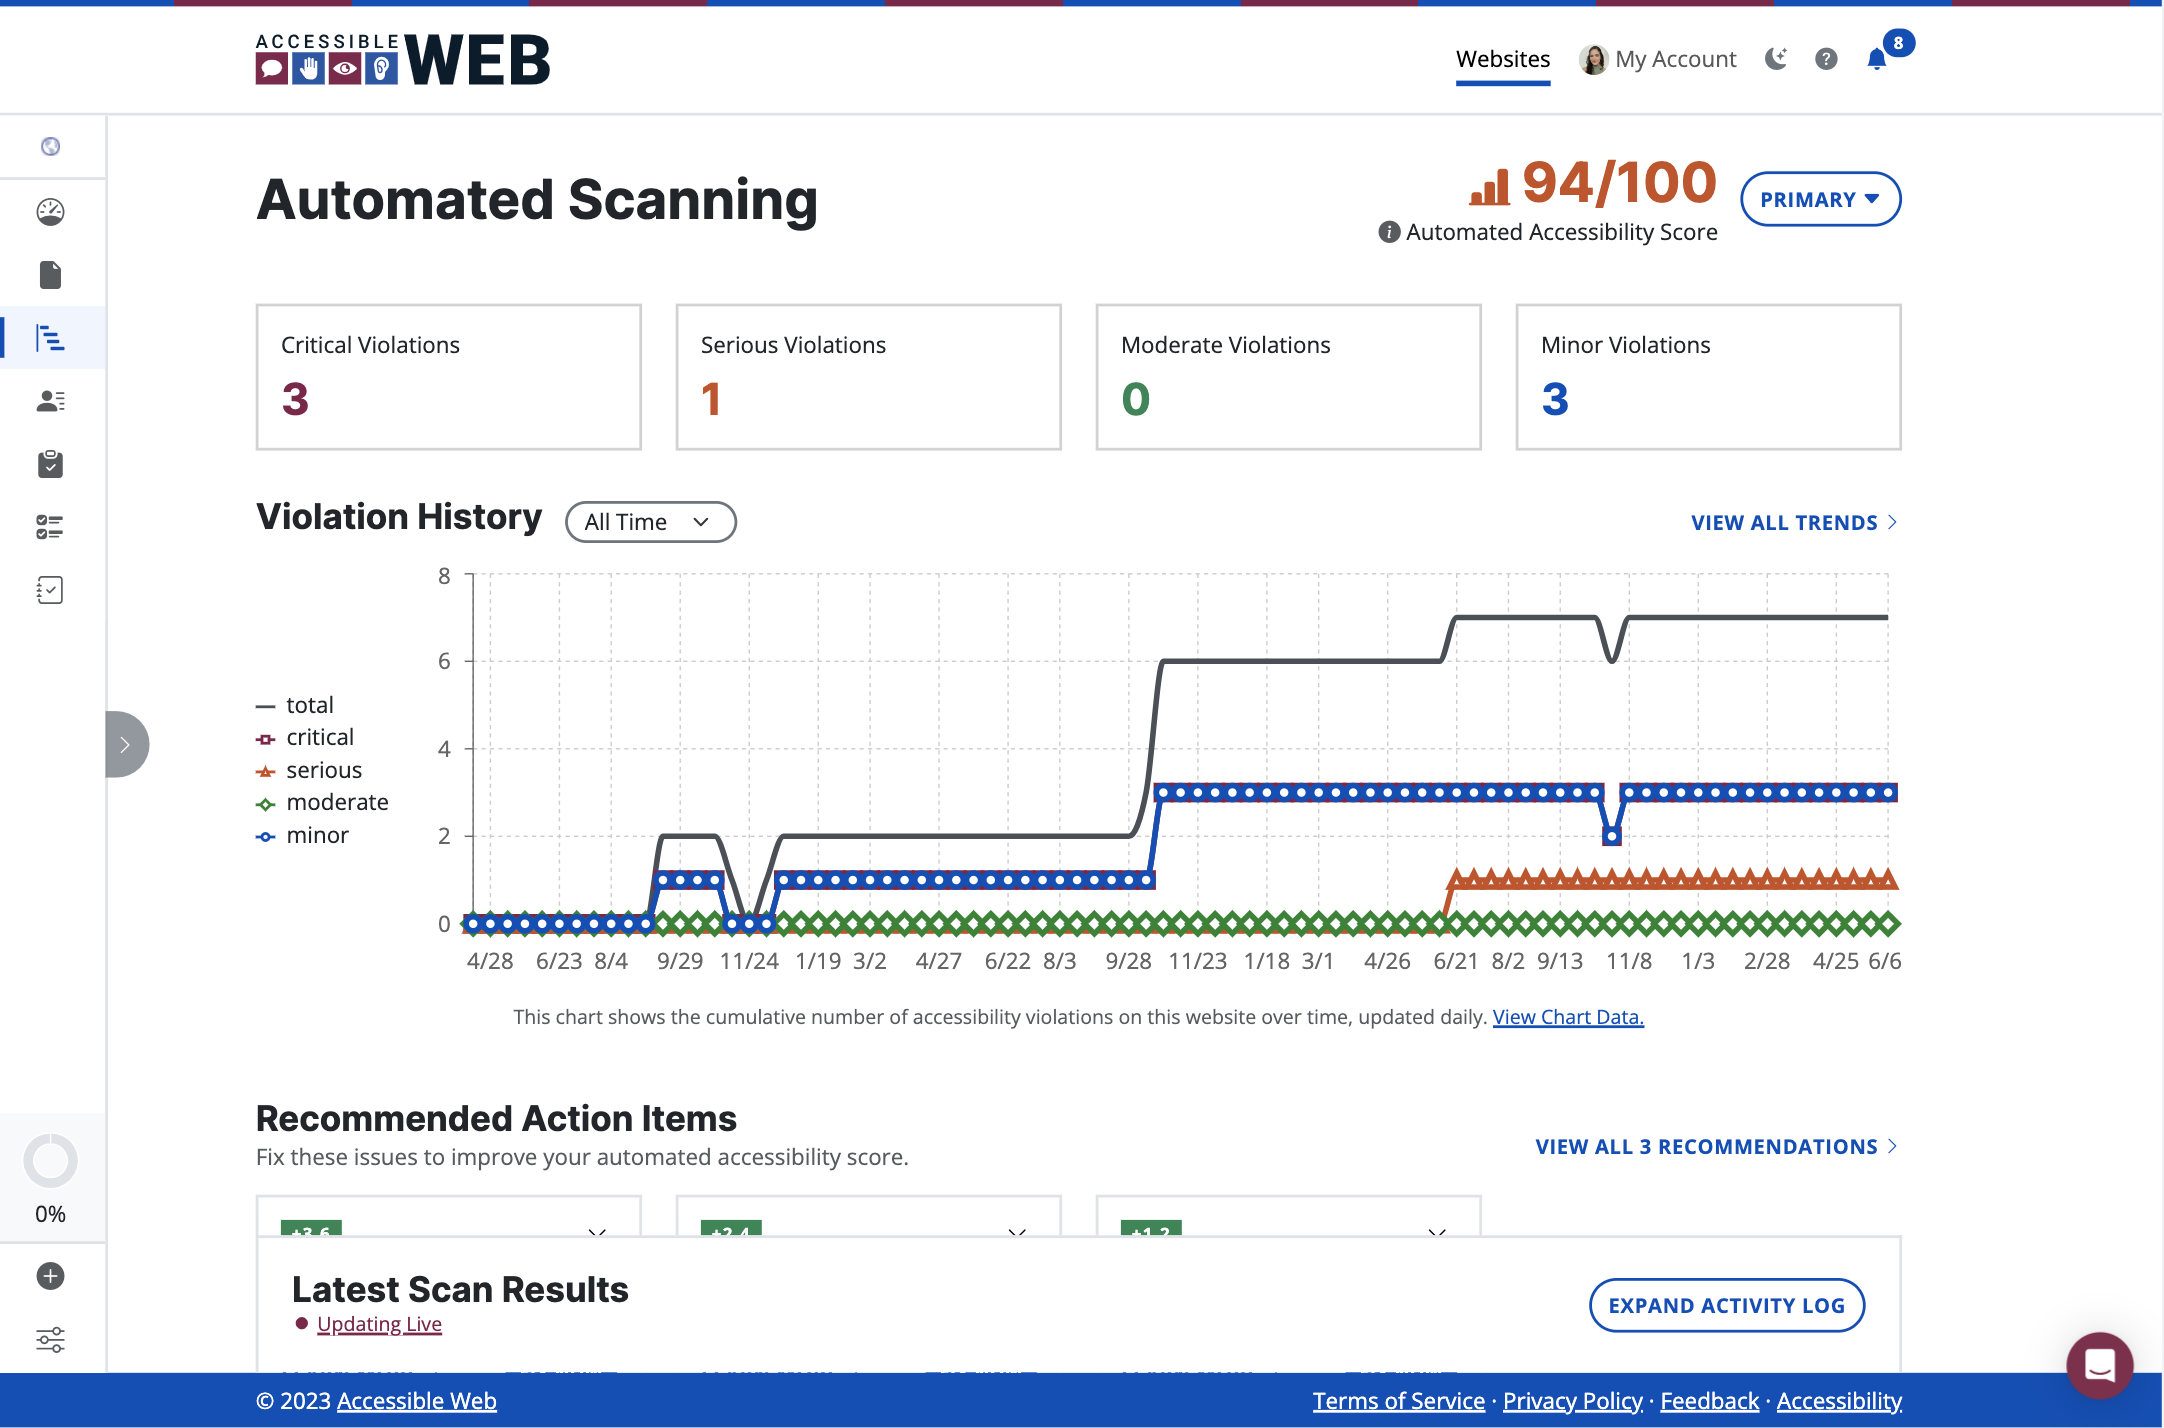 A view of a website's scan results showing the total number of violations, a chart of accessibility history, recommendations, and latest scan results.